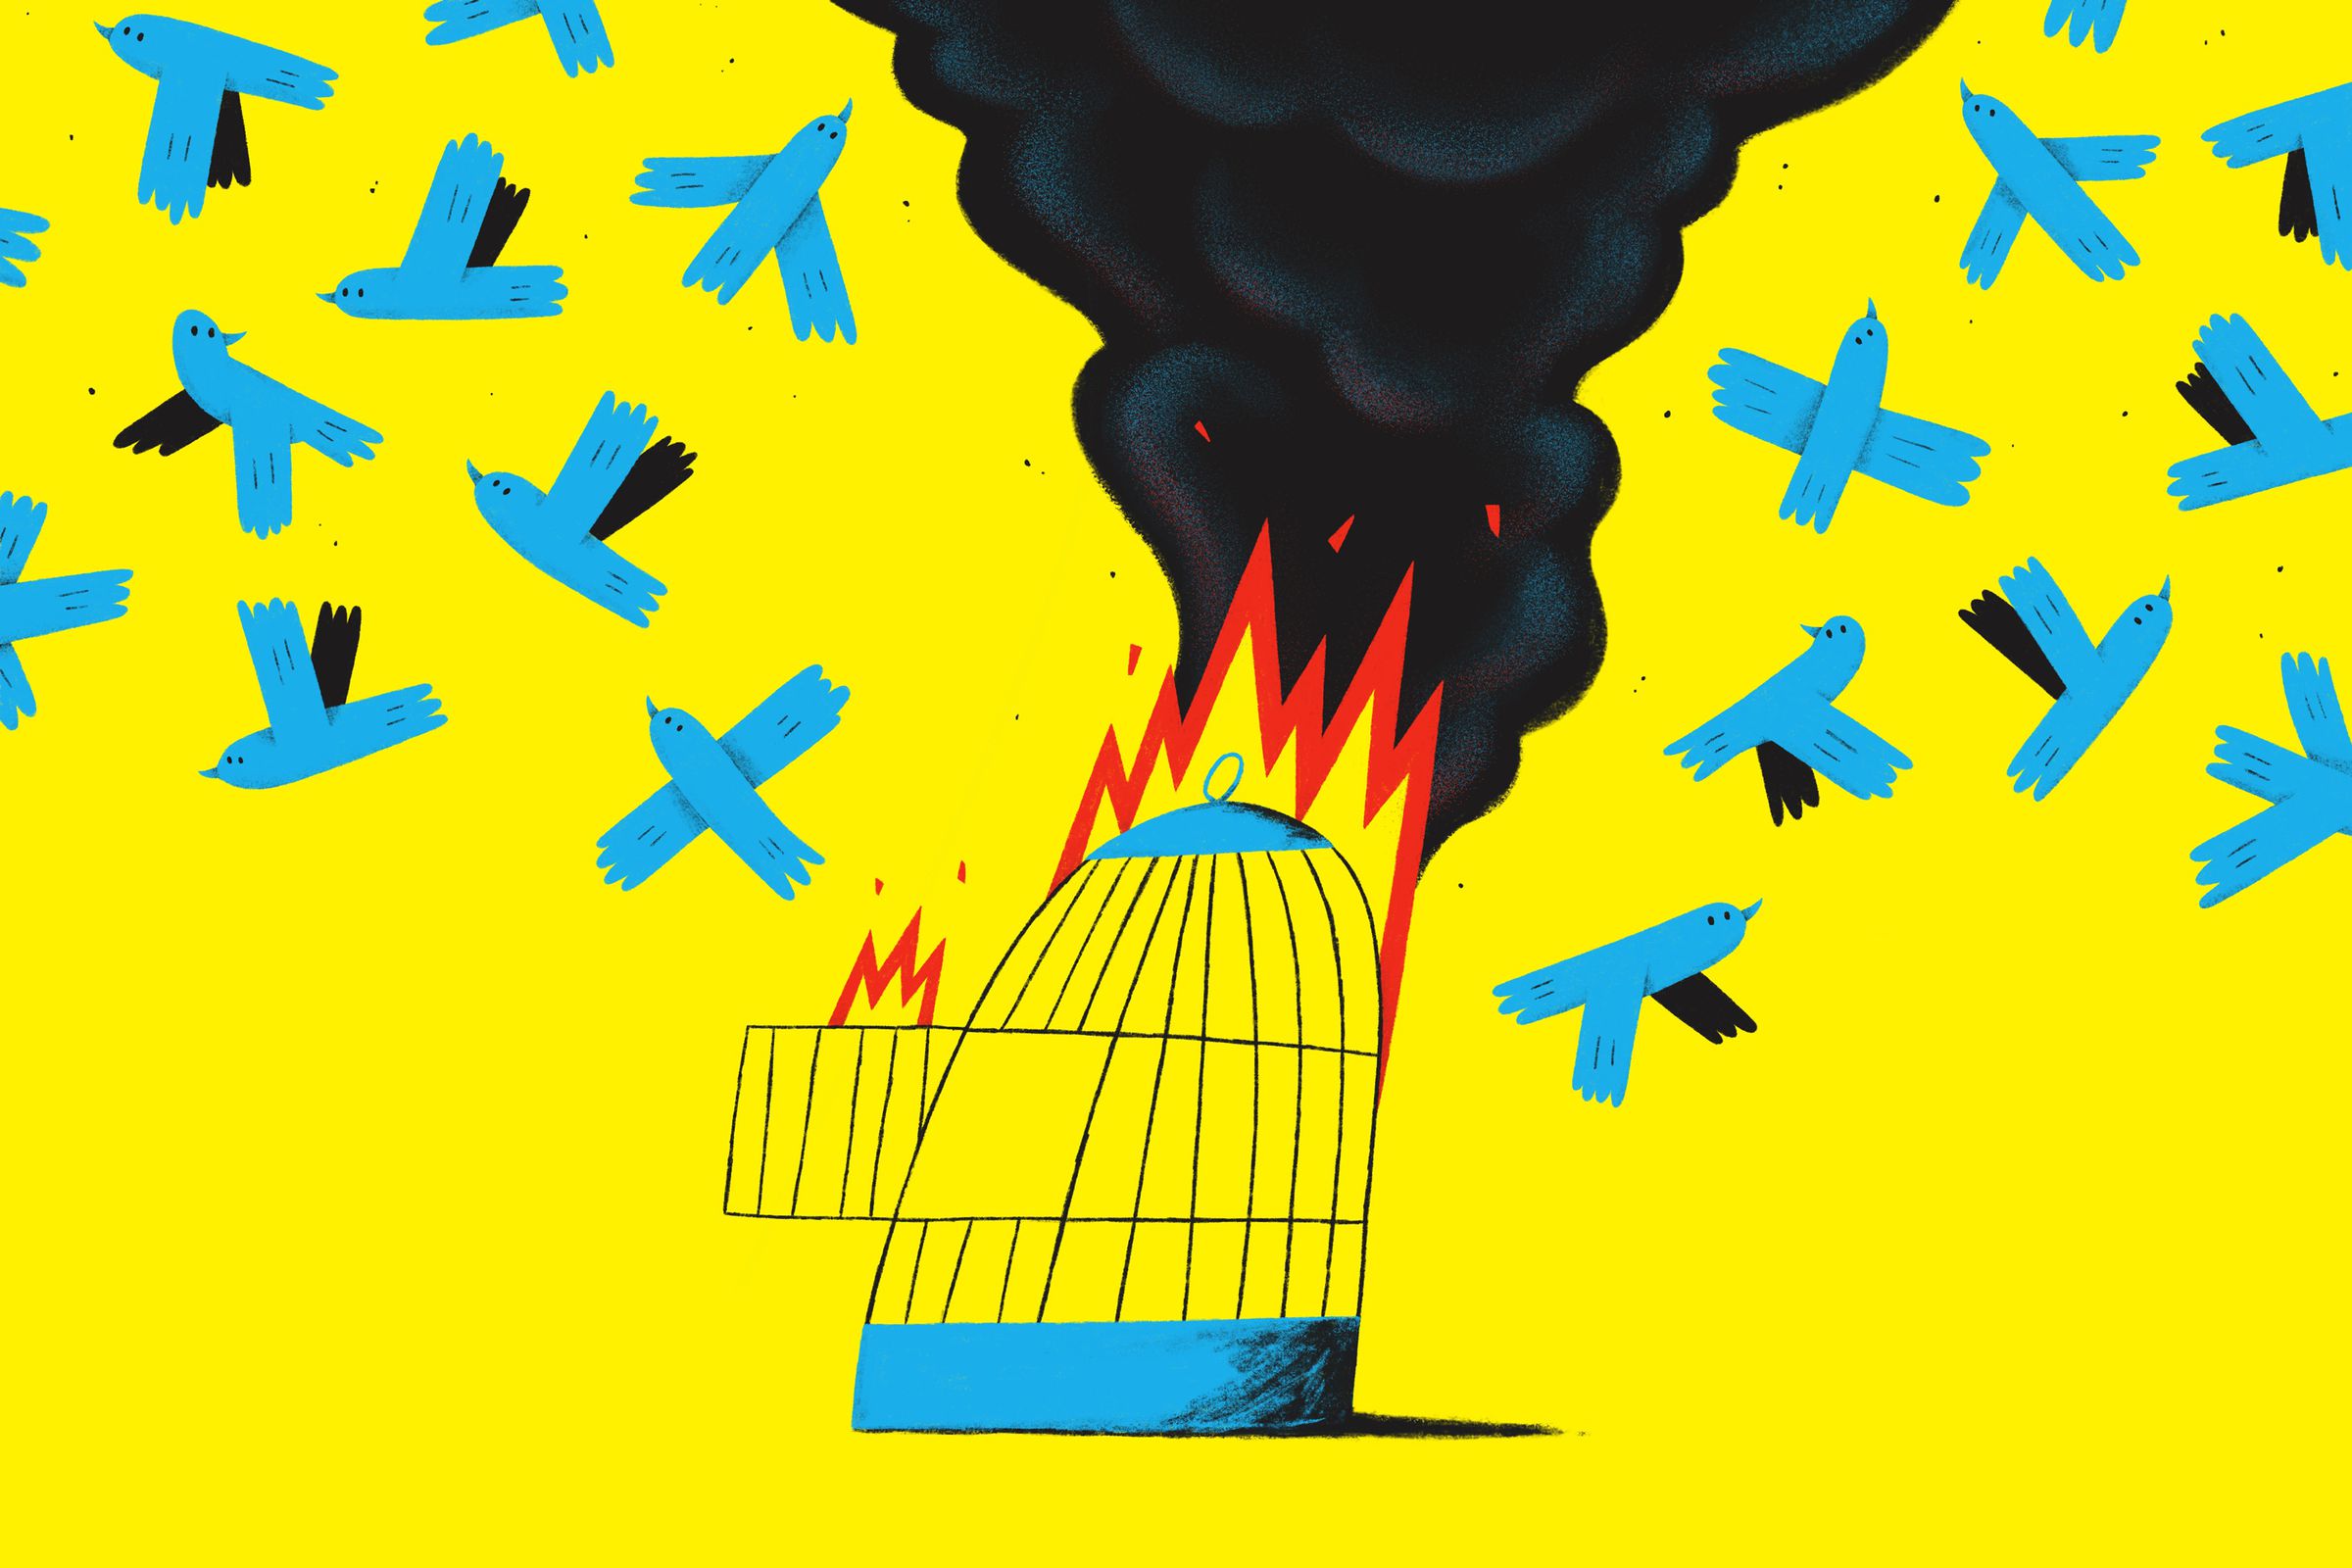 An image of a birdcage on fire